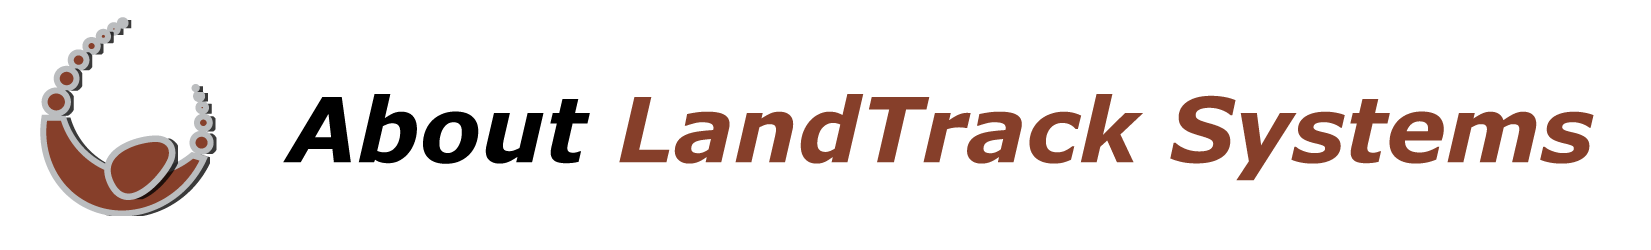 About LandTrack Systems